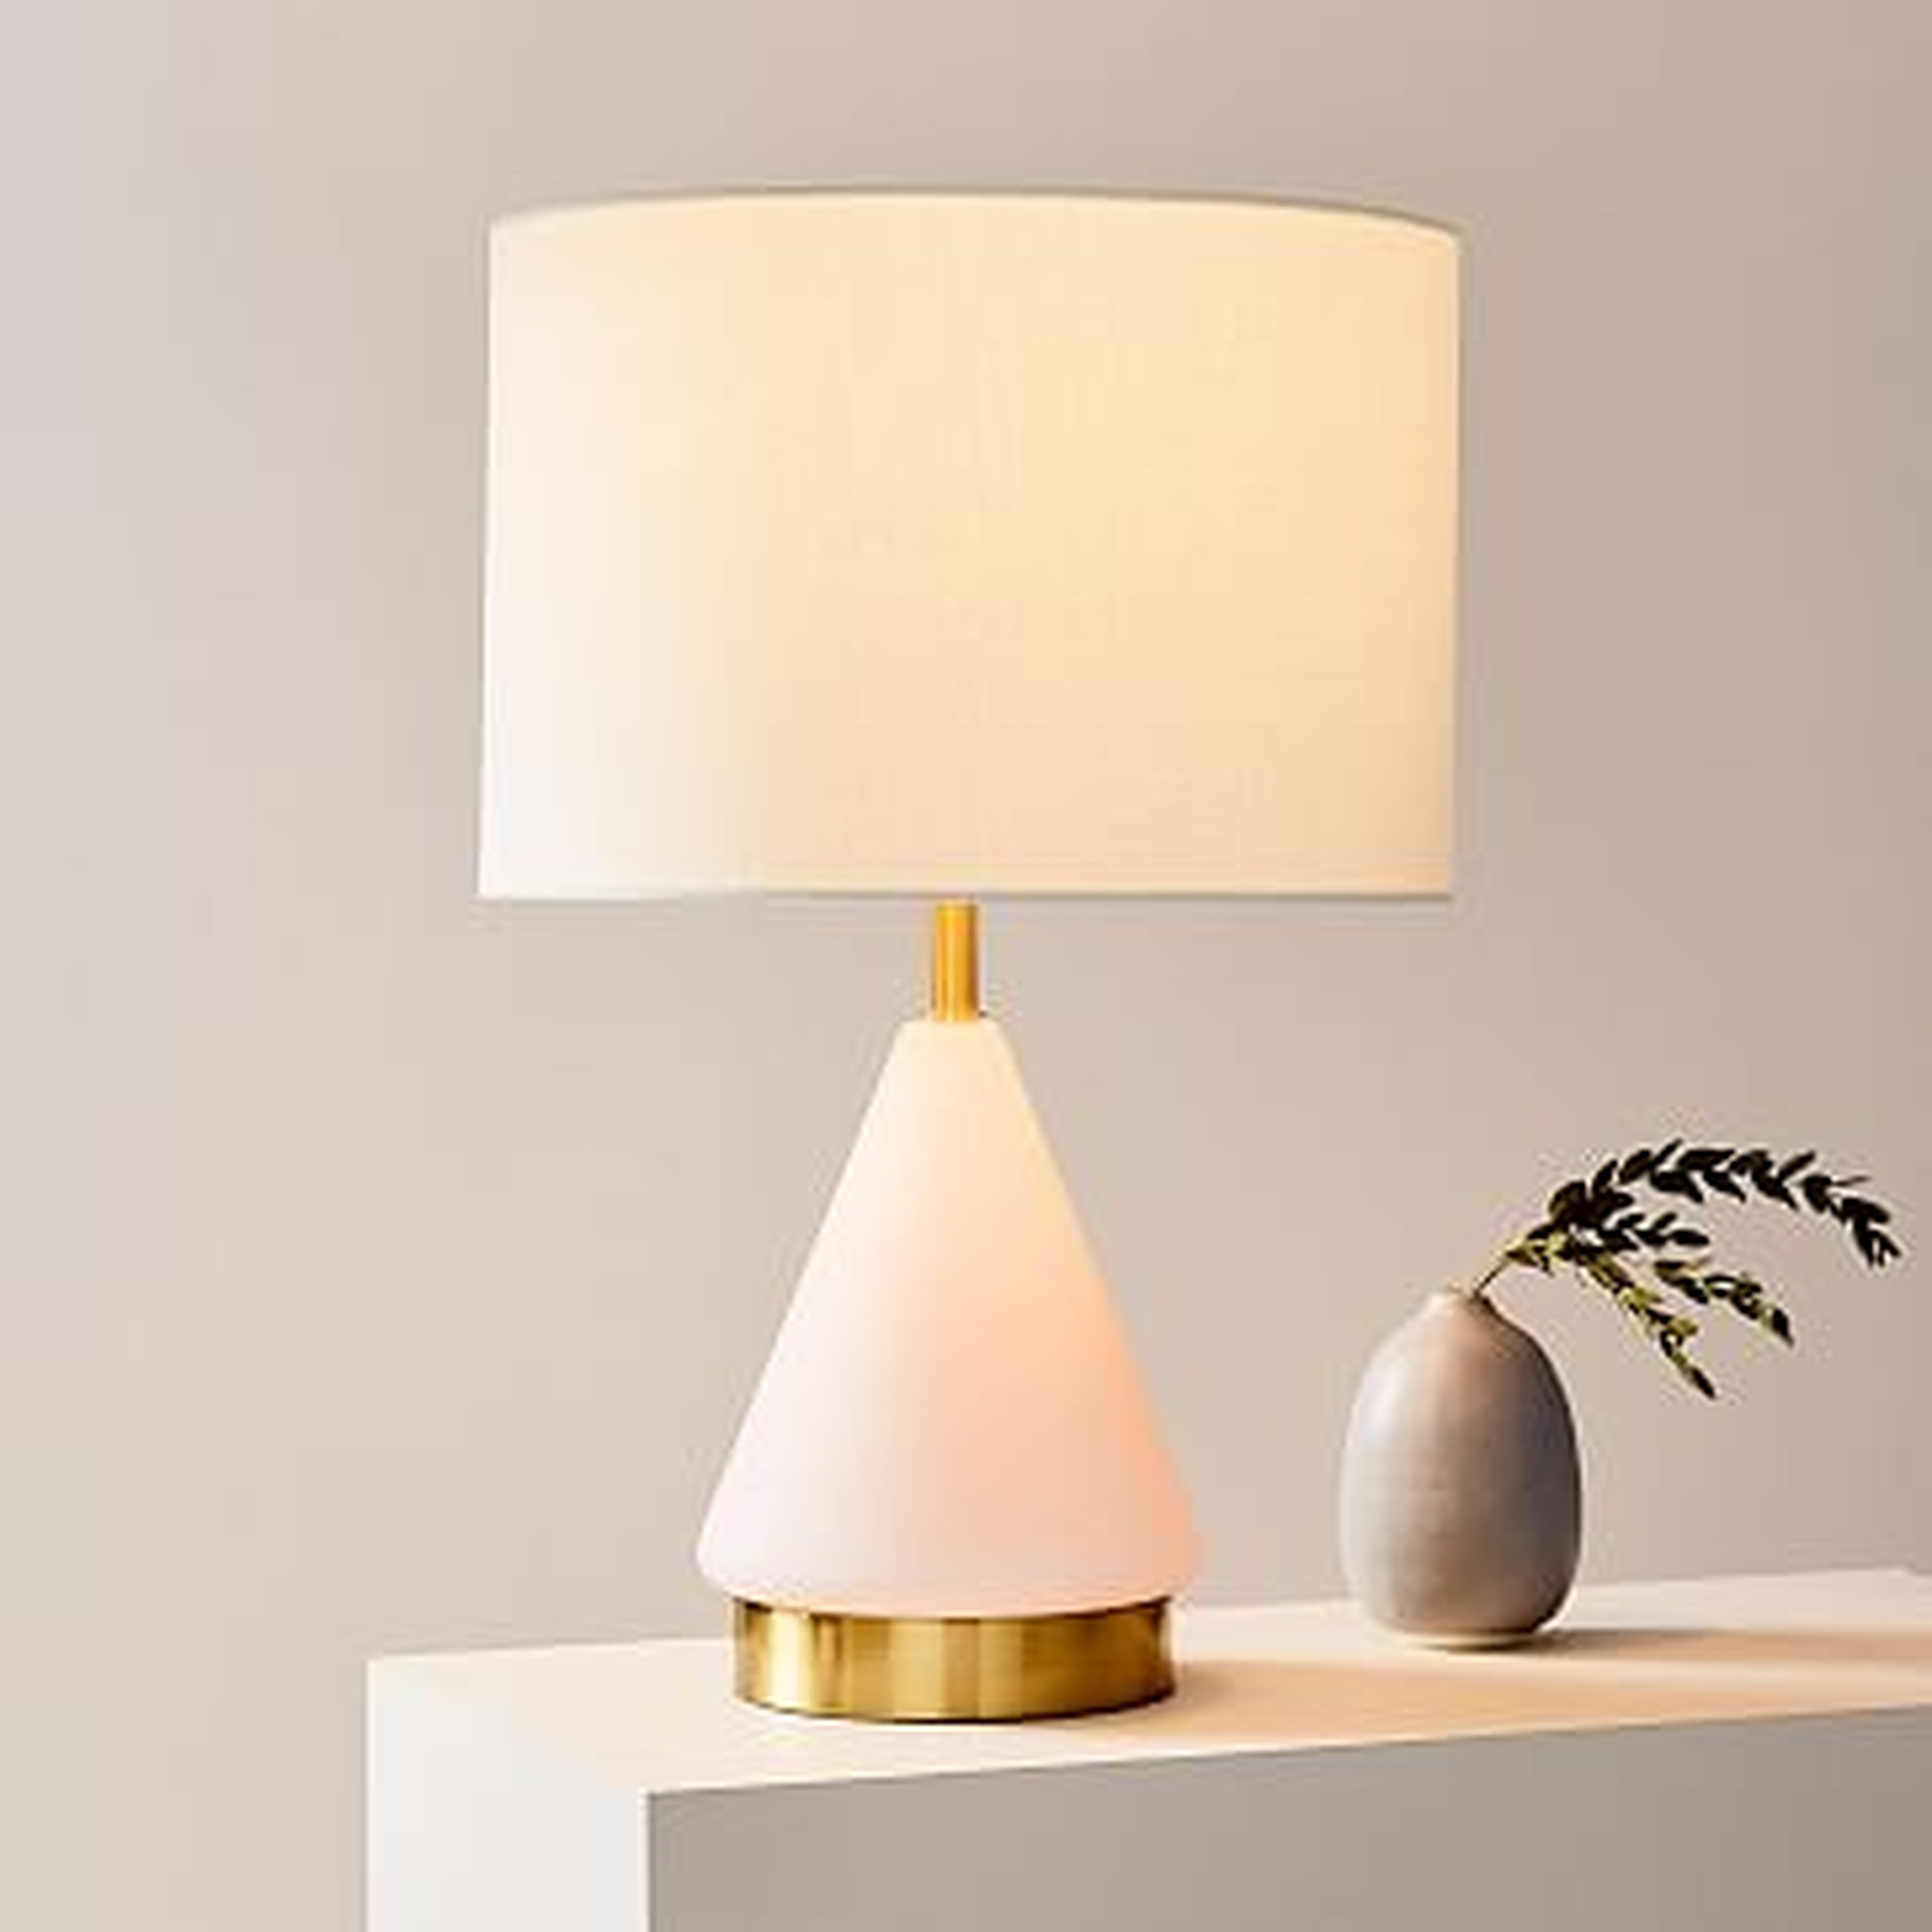 Metalized Glass Table Lamp + USB, Small, Blush, Antique Brass - West Elm